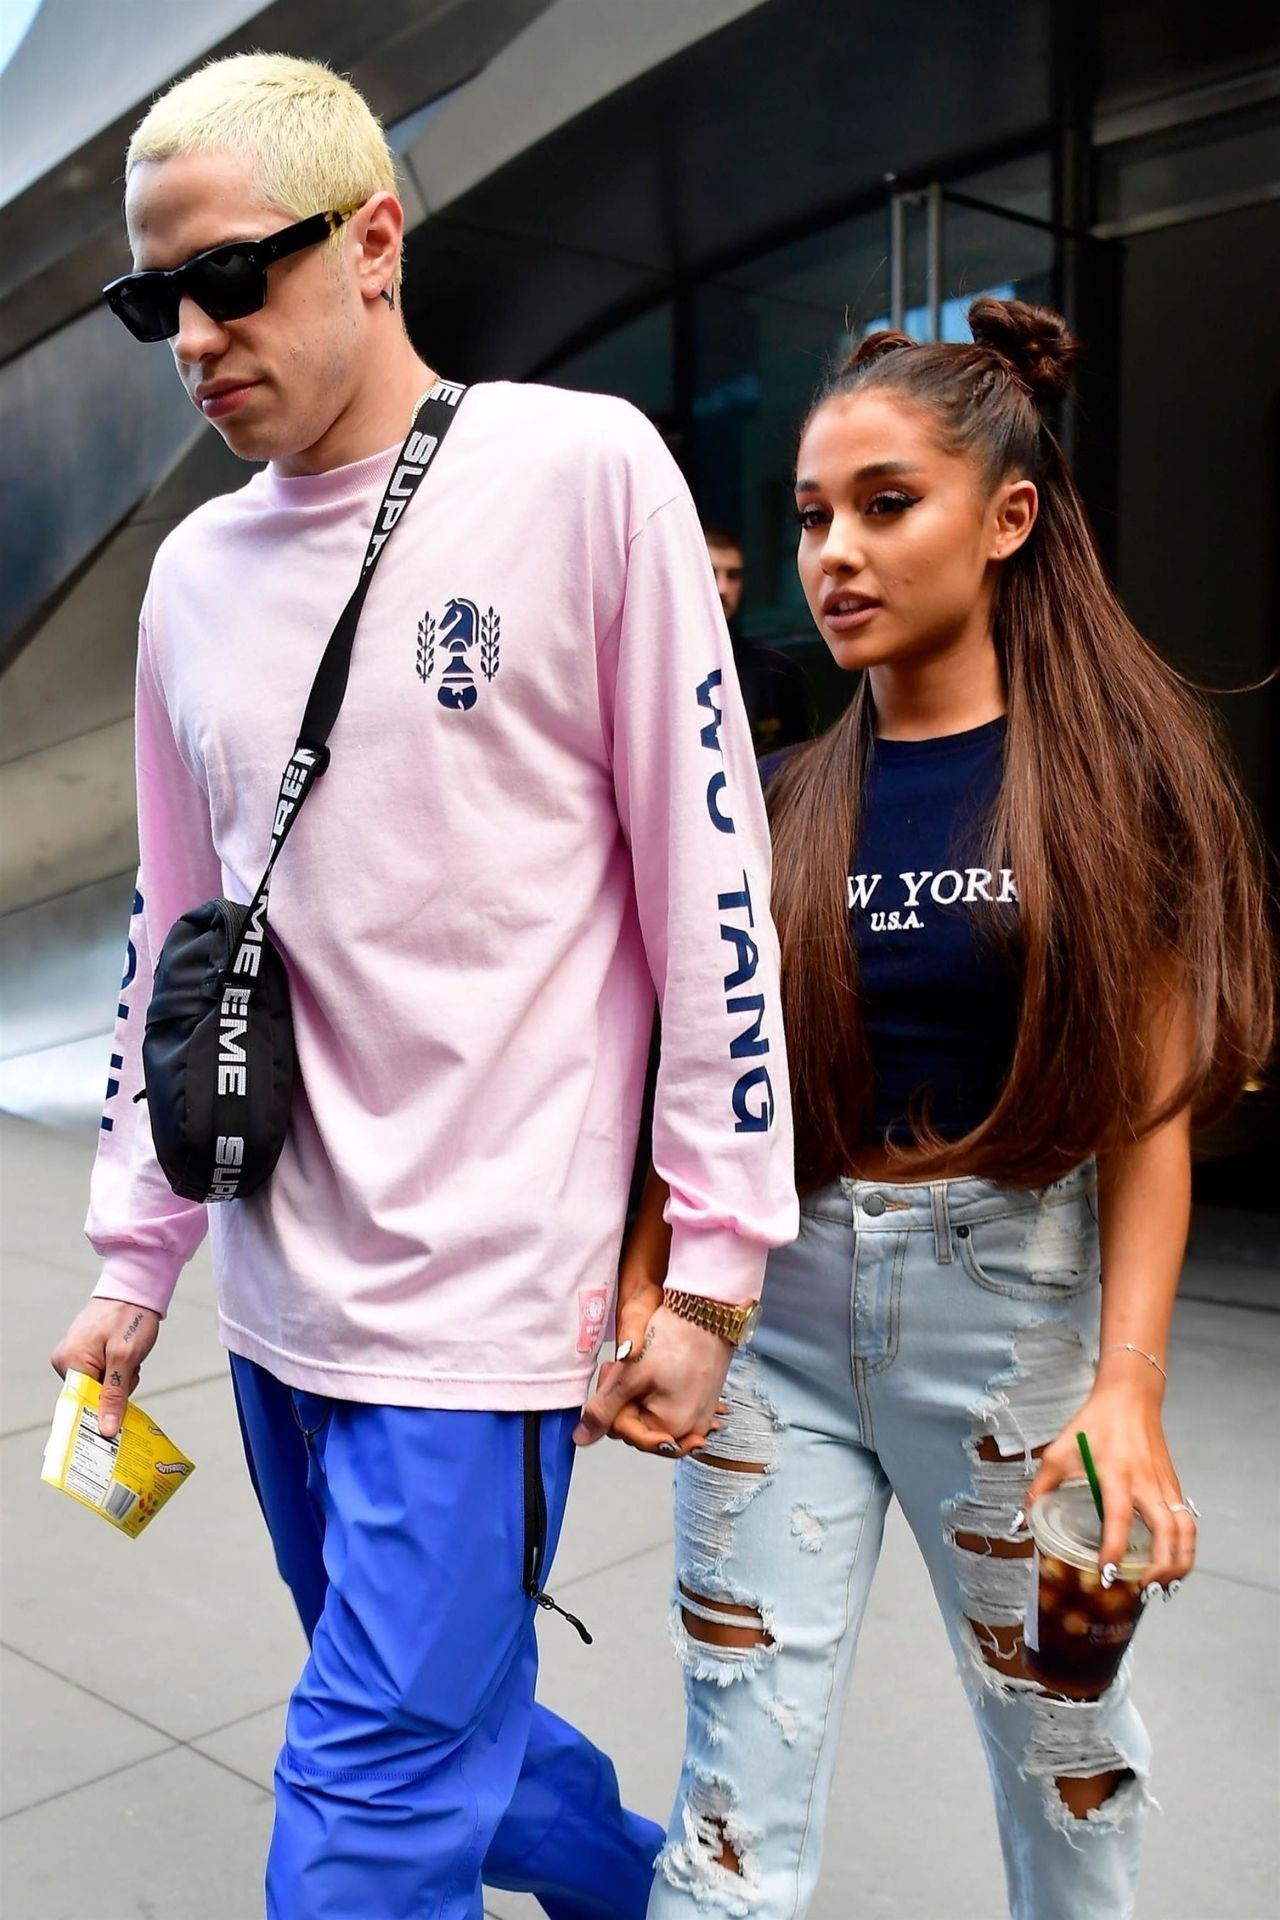 ariana-grande-and-pete-davidson-heading-to-her-concert-in-new-york-1.jpg